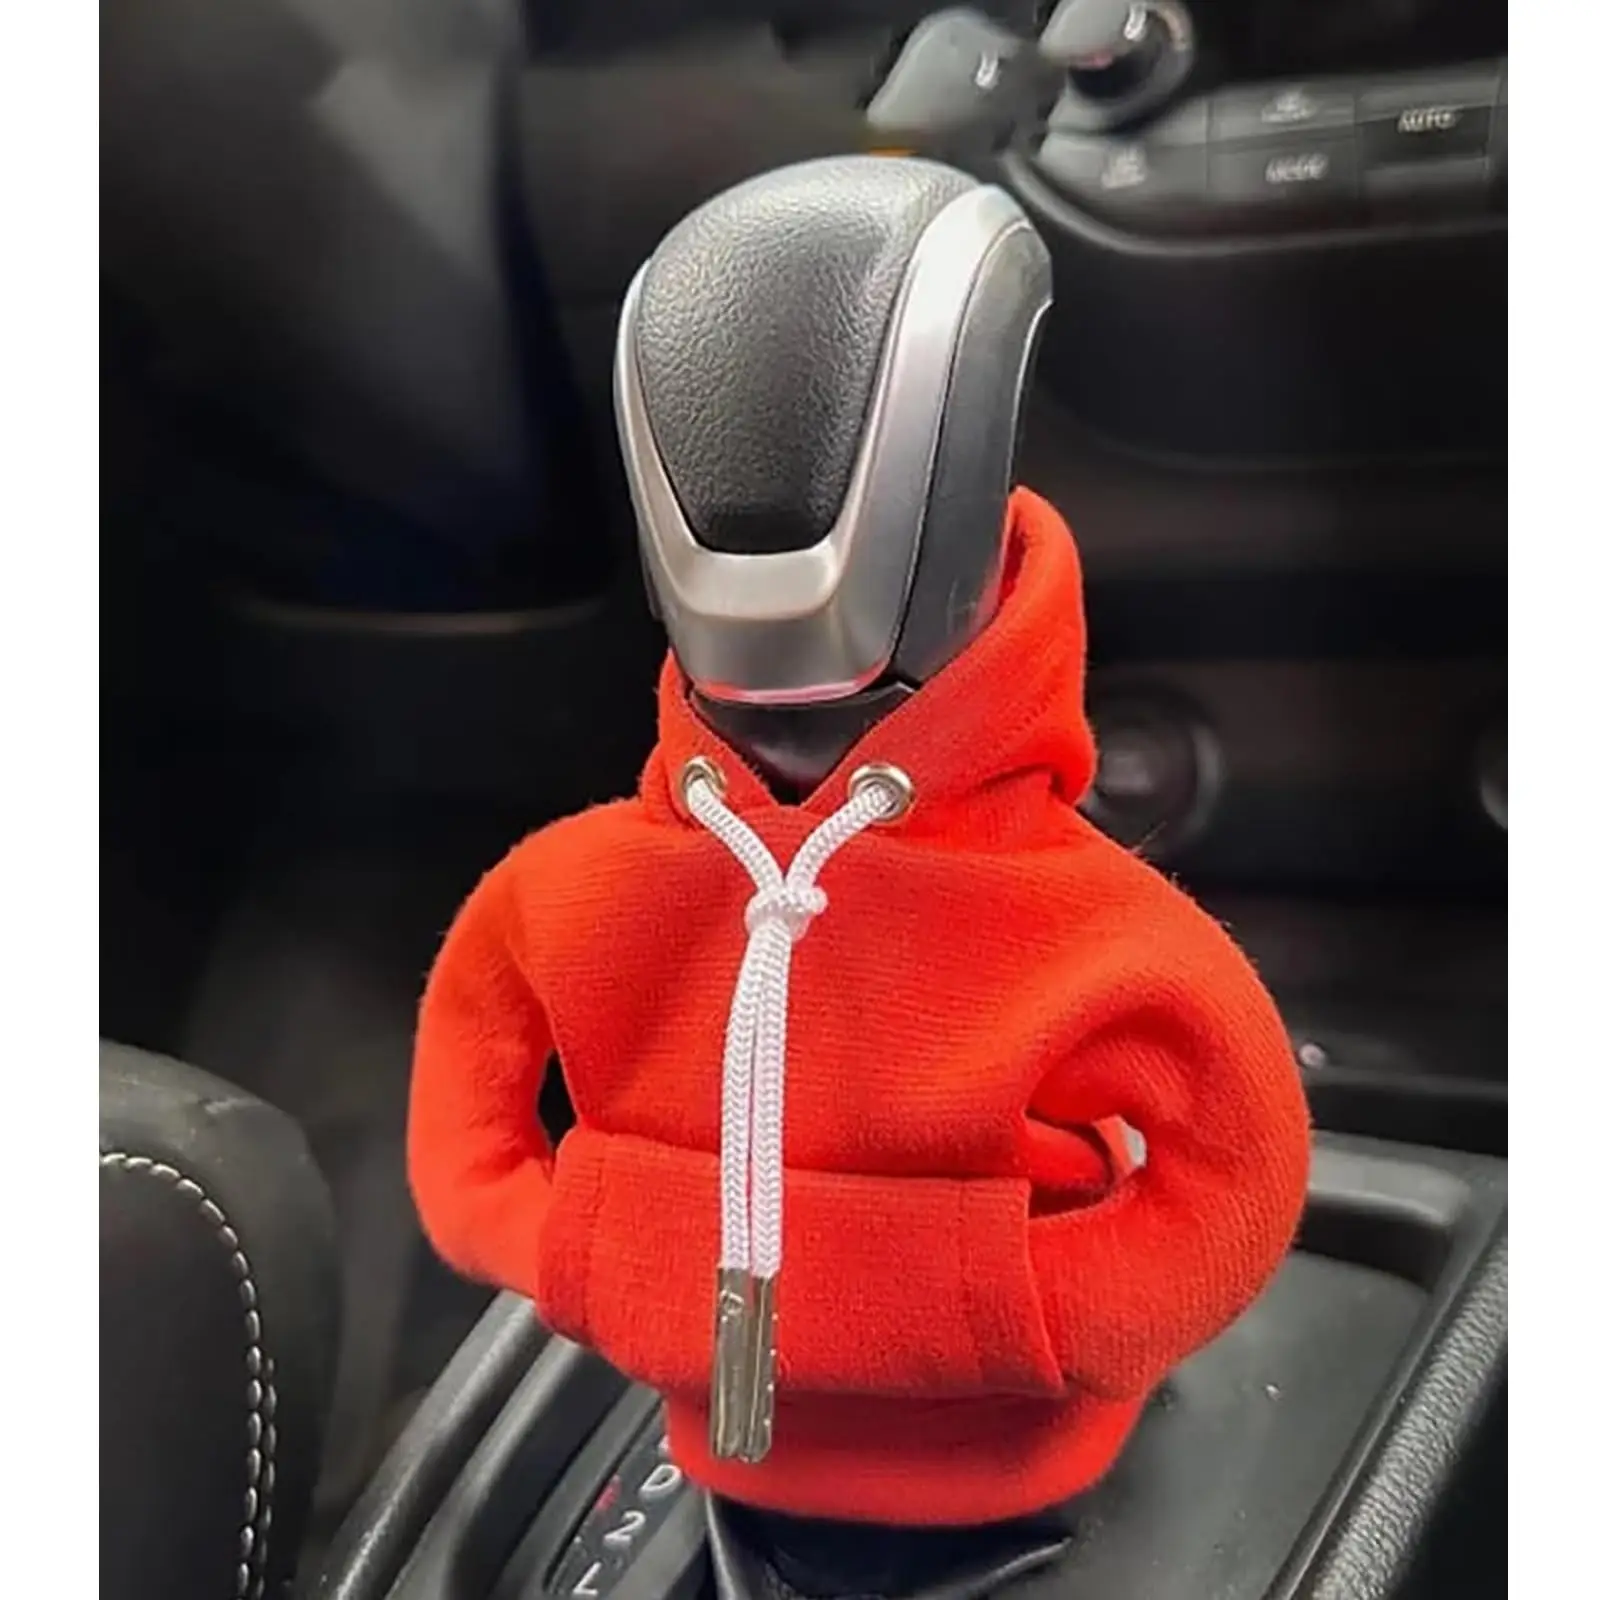 

2023 New Arrival Creativity Sweatshirt Nonslip Funny Modeling Universal Gear Shift Knob Cover car gear hoodie cover